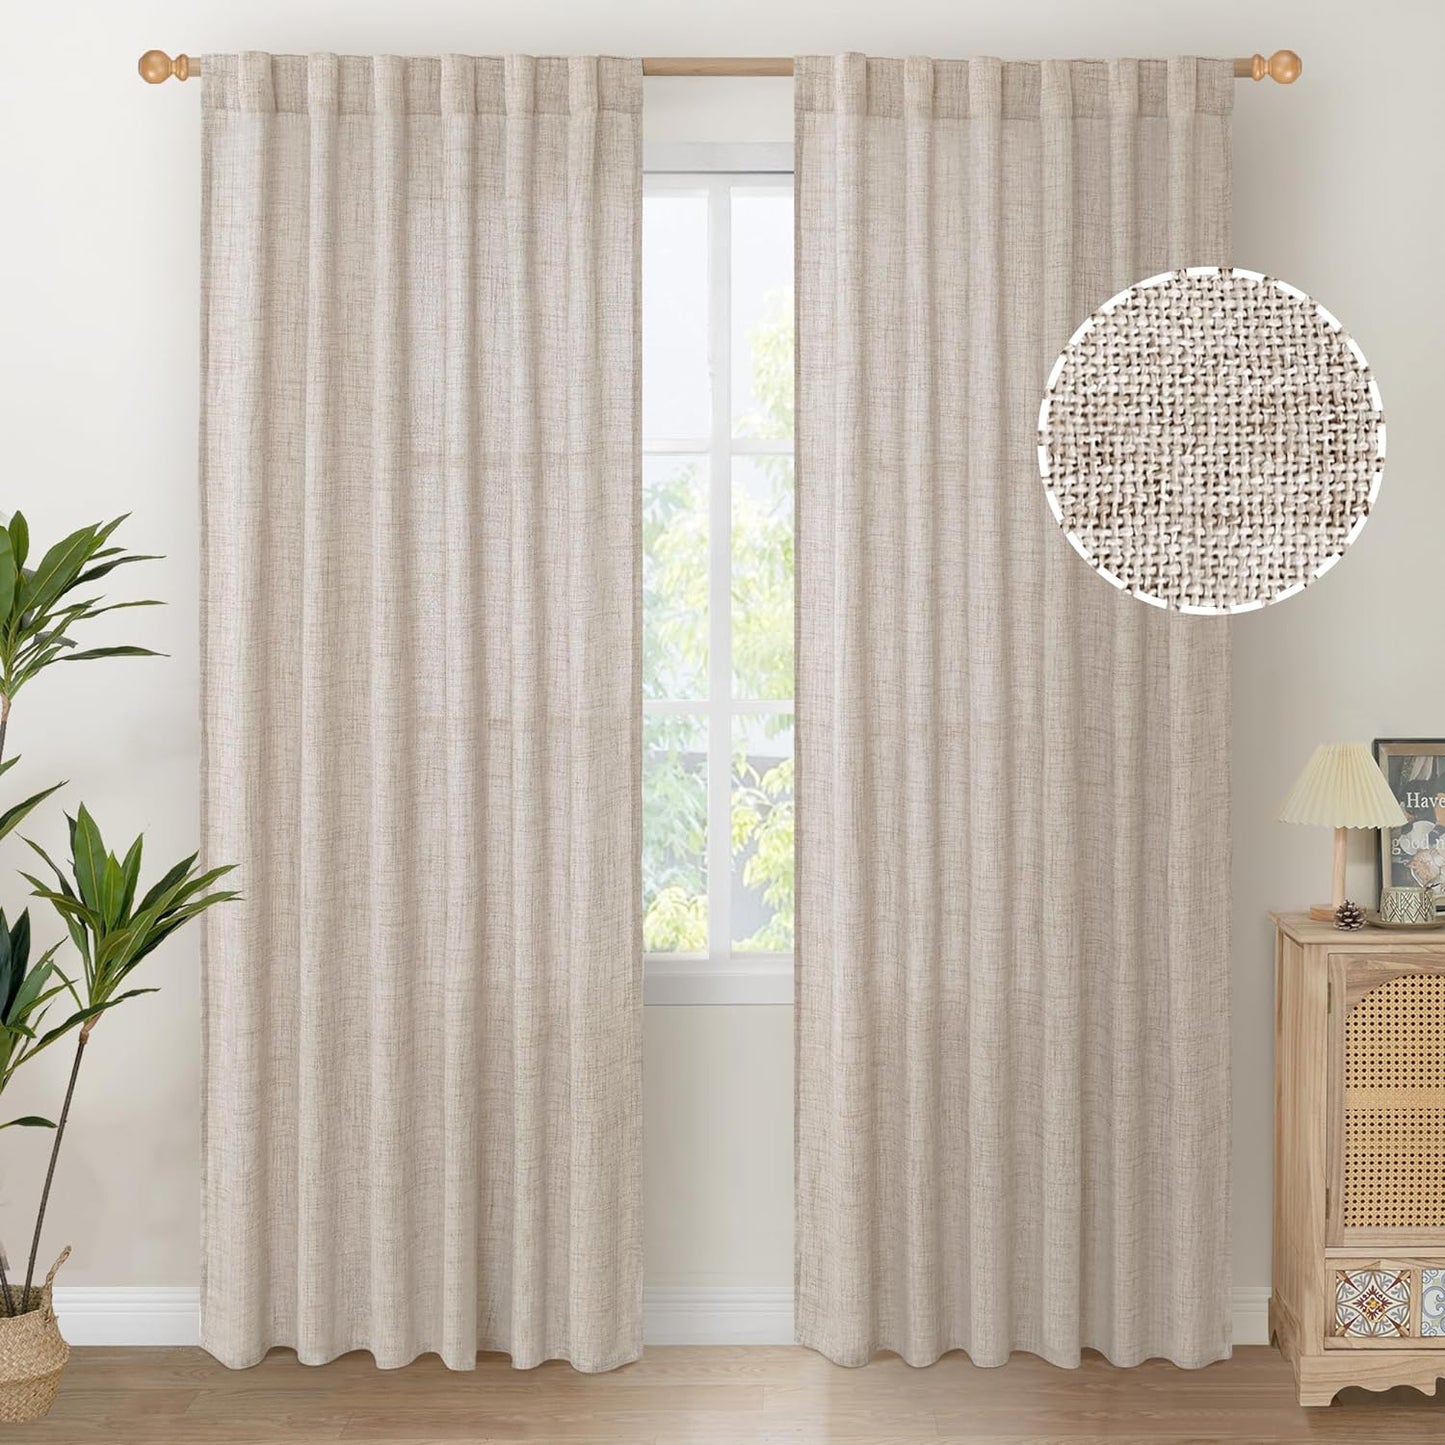 Youngstex Natural Linen Curtains 72 Inch Length 2 Panels for Living Room Light Filtering Textured Window Drapes for Bedroom Dining Office Back Tab Rod Pocket, 52 X 72 Inch  YoungsTex Natural 52W X 84L 